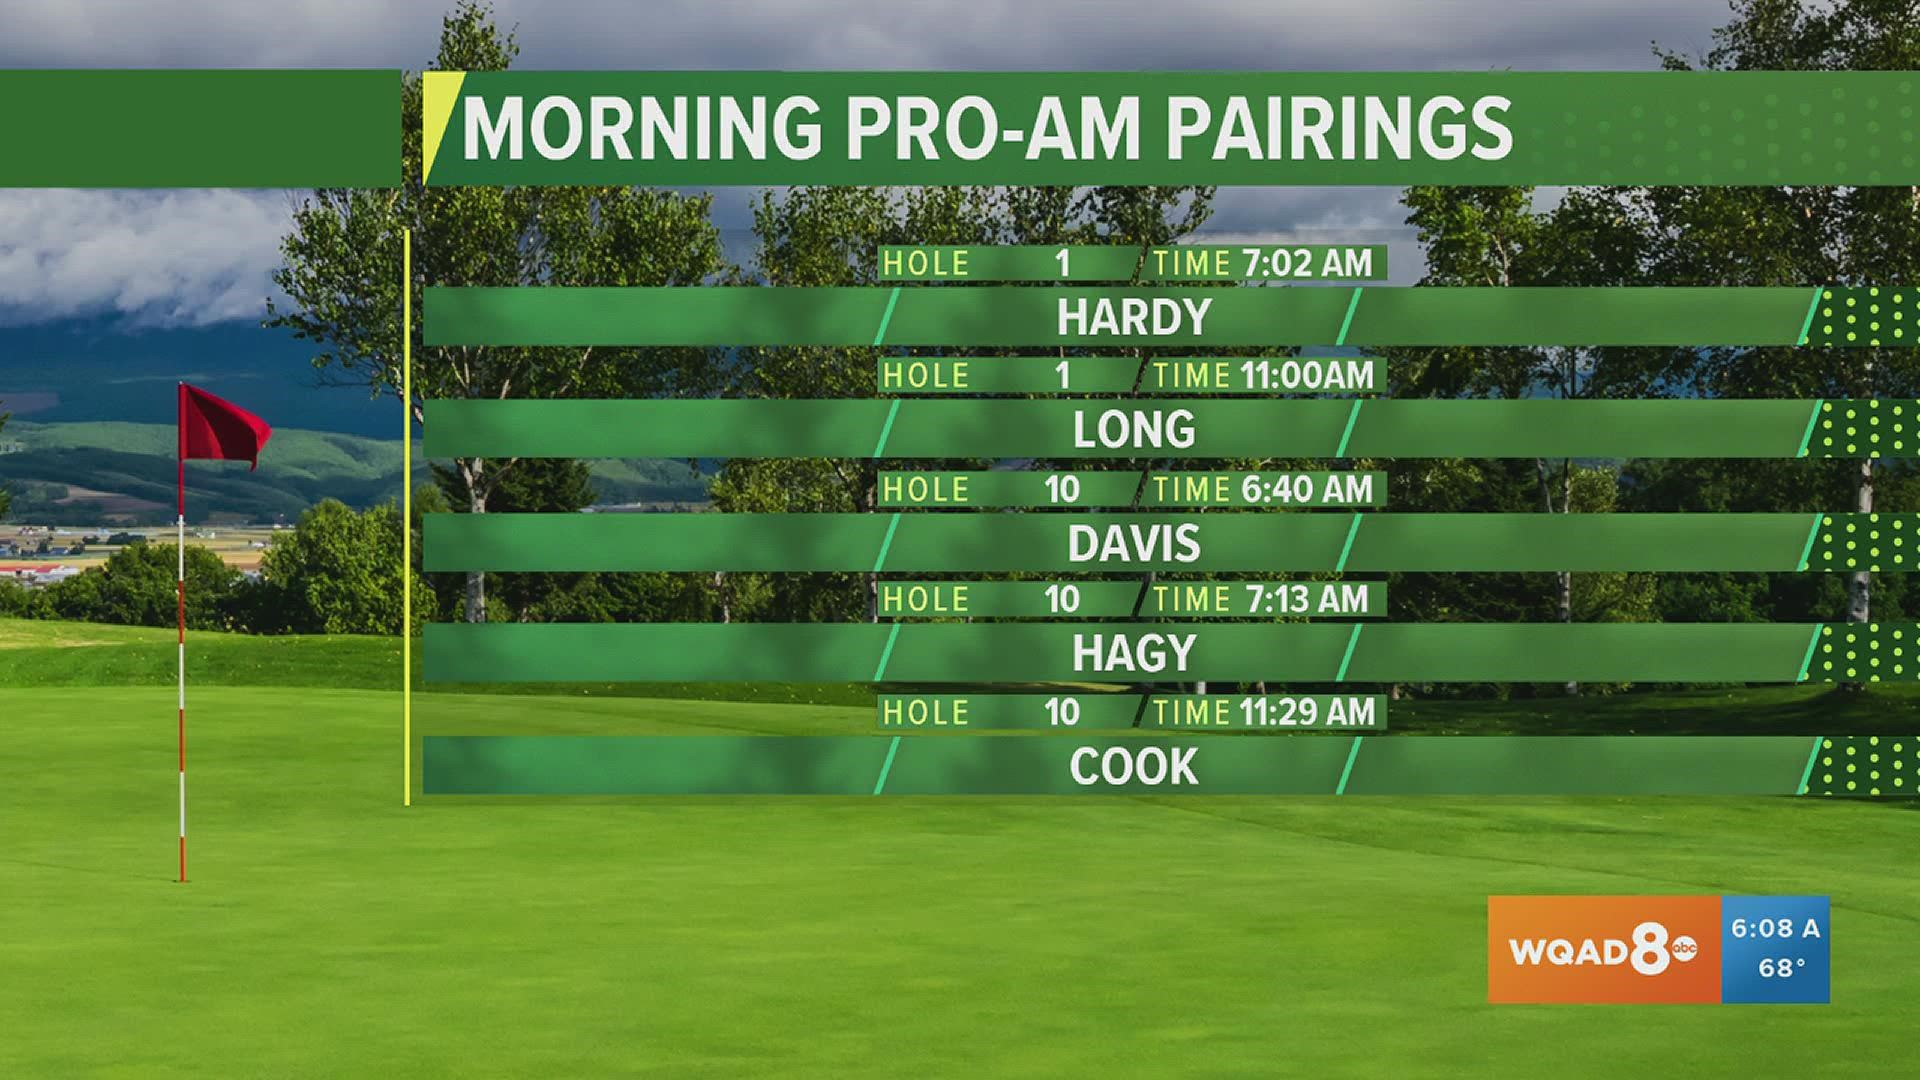 Here's a look at some of the pairings for Wednesday's Pro-Am at the John Deere Classic.